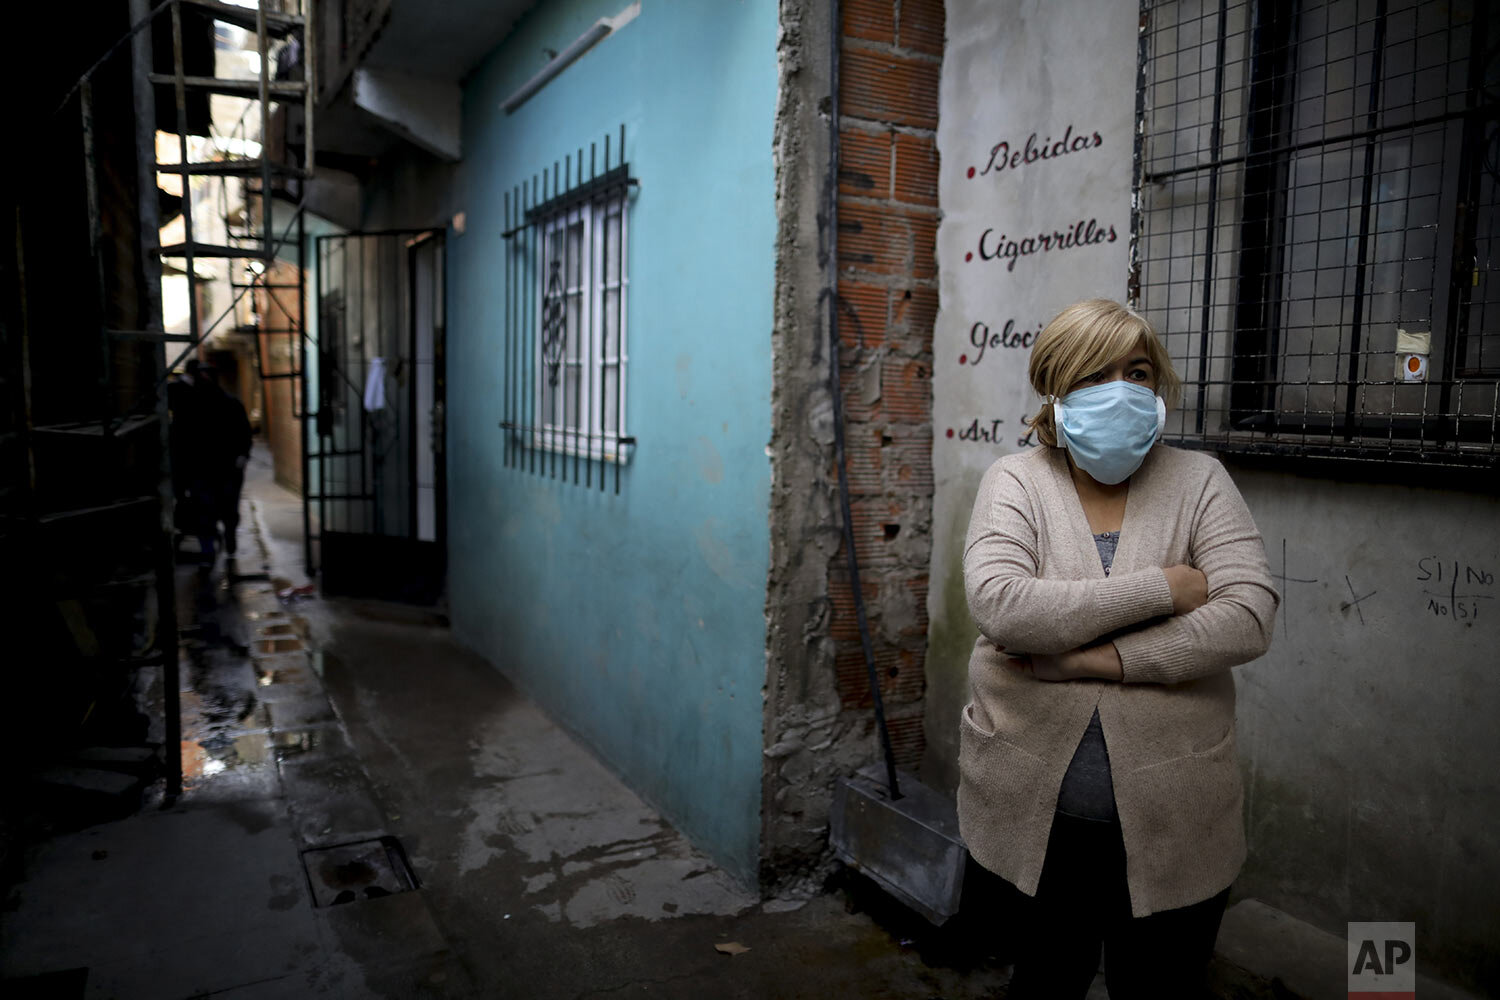  Cristina Rodriguez stands outside her home in “Villa 31” in Buenos Aires, Argentina, Tuesday, May 5, 2020. (AP Photo/Natacha Pisarenko) 